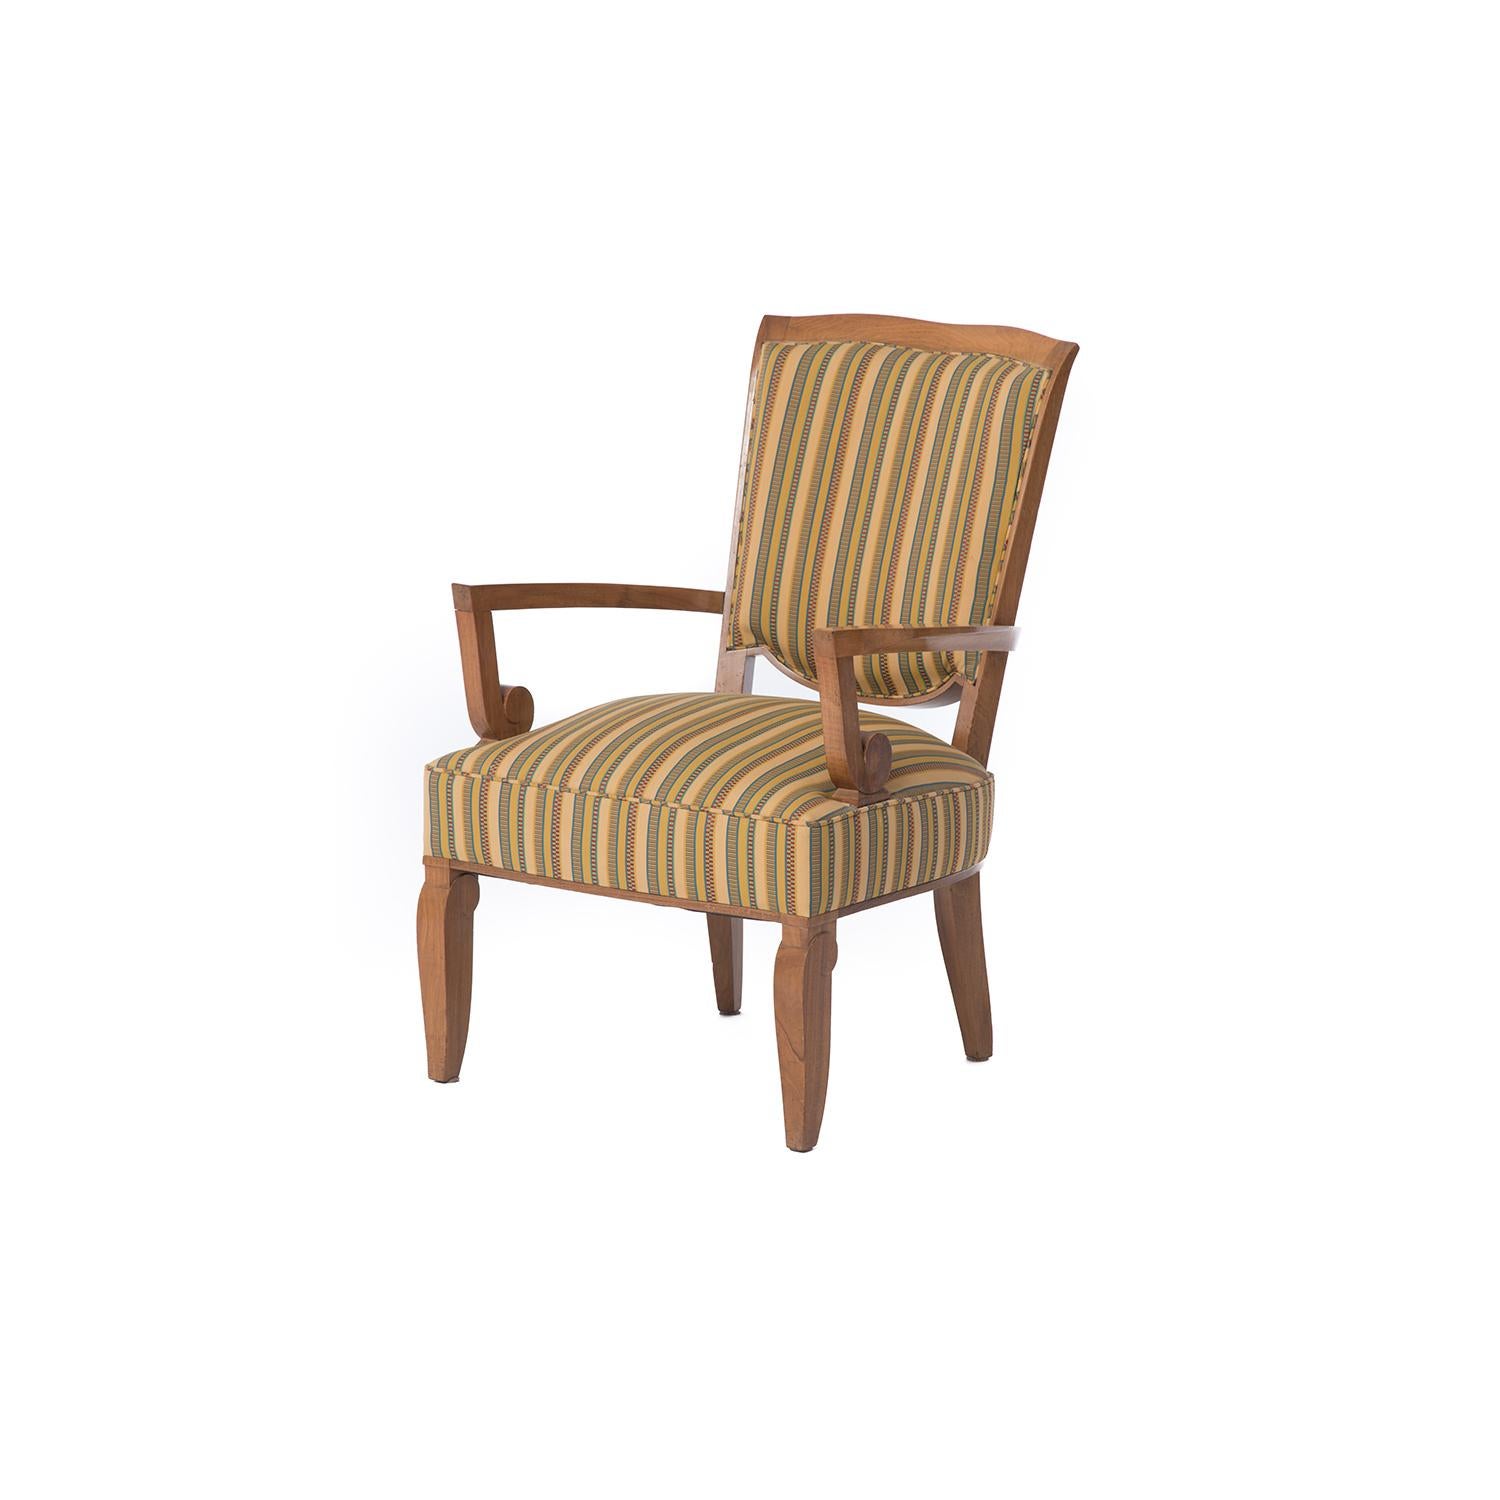 French Art Deco armchair in Cuban mahogany designed by Jules Leleu. Frame is in very good vintage condition, clear lacquer finish shows some signs of use but is in acceptable and useable condition. Fabric is in good condition but does have two small